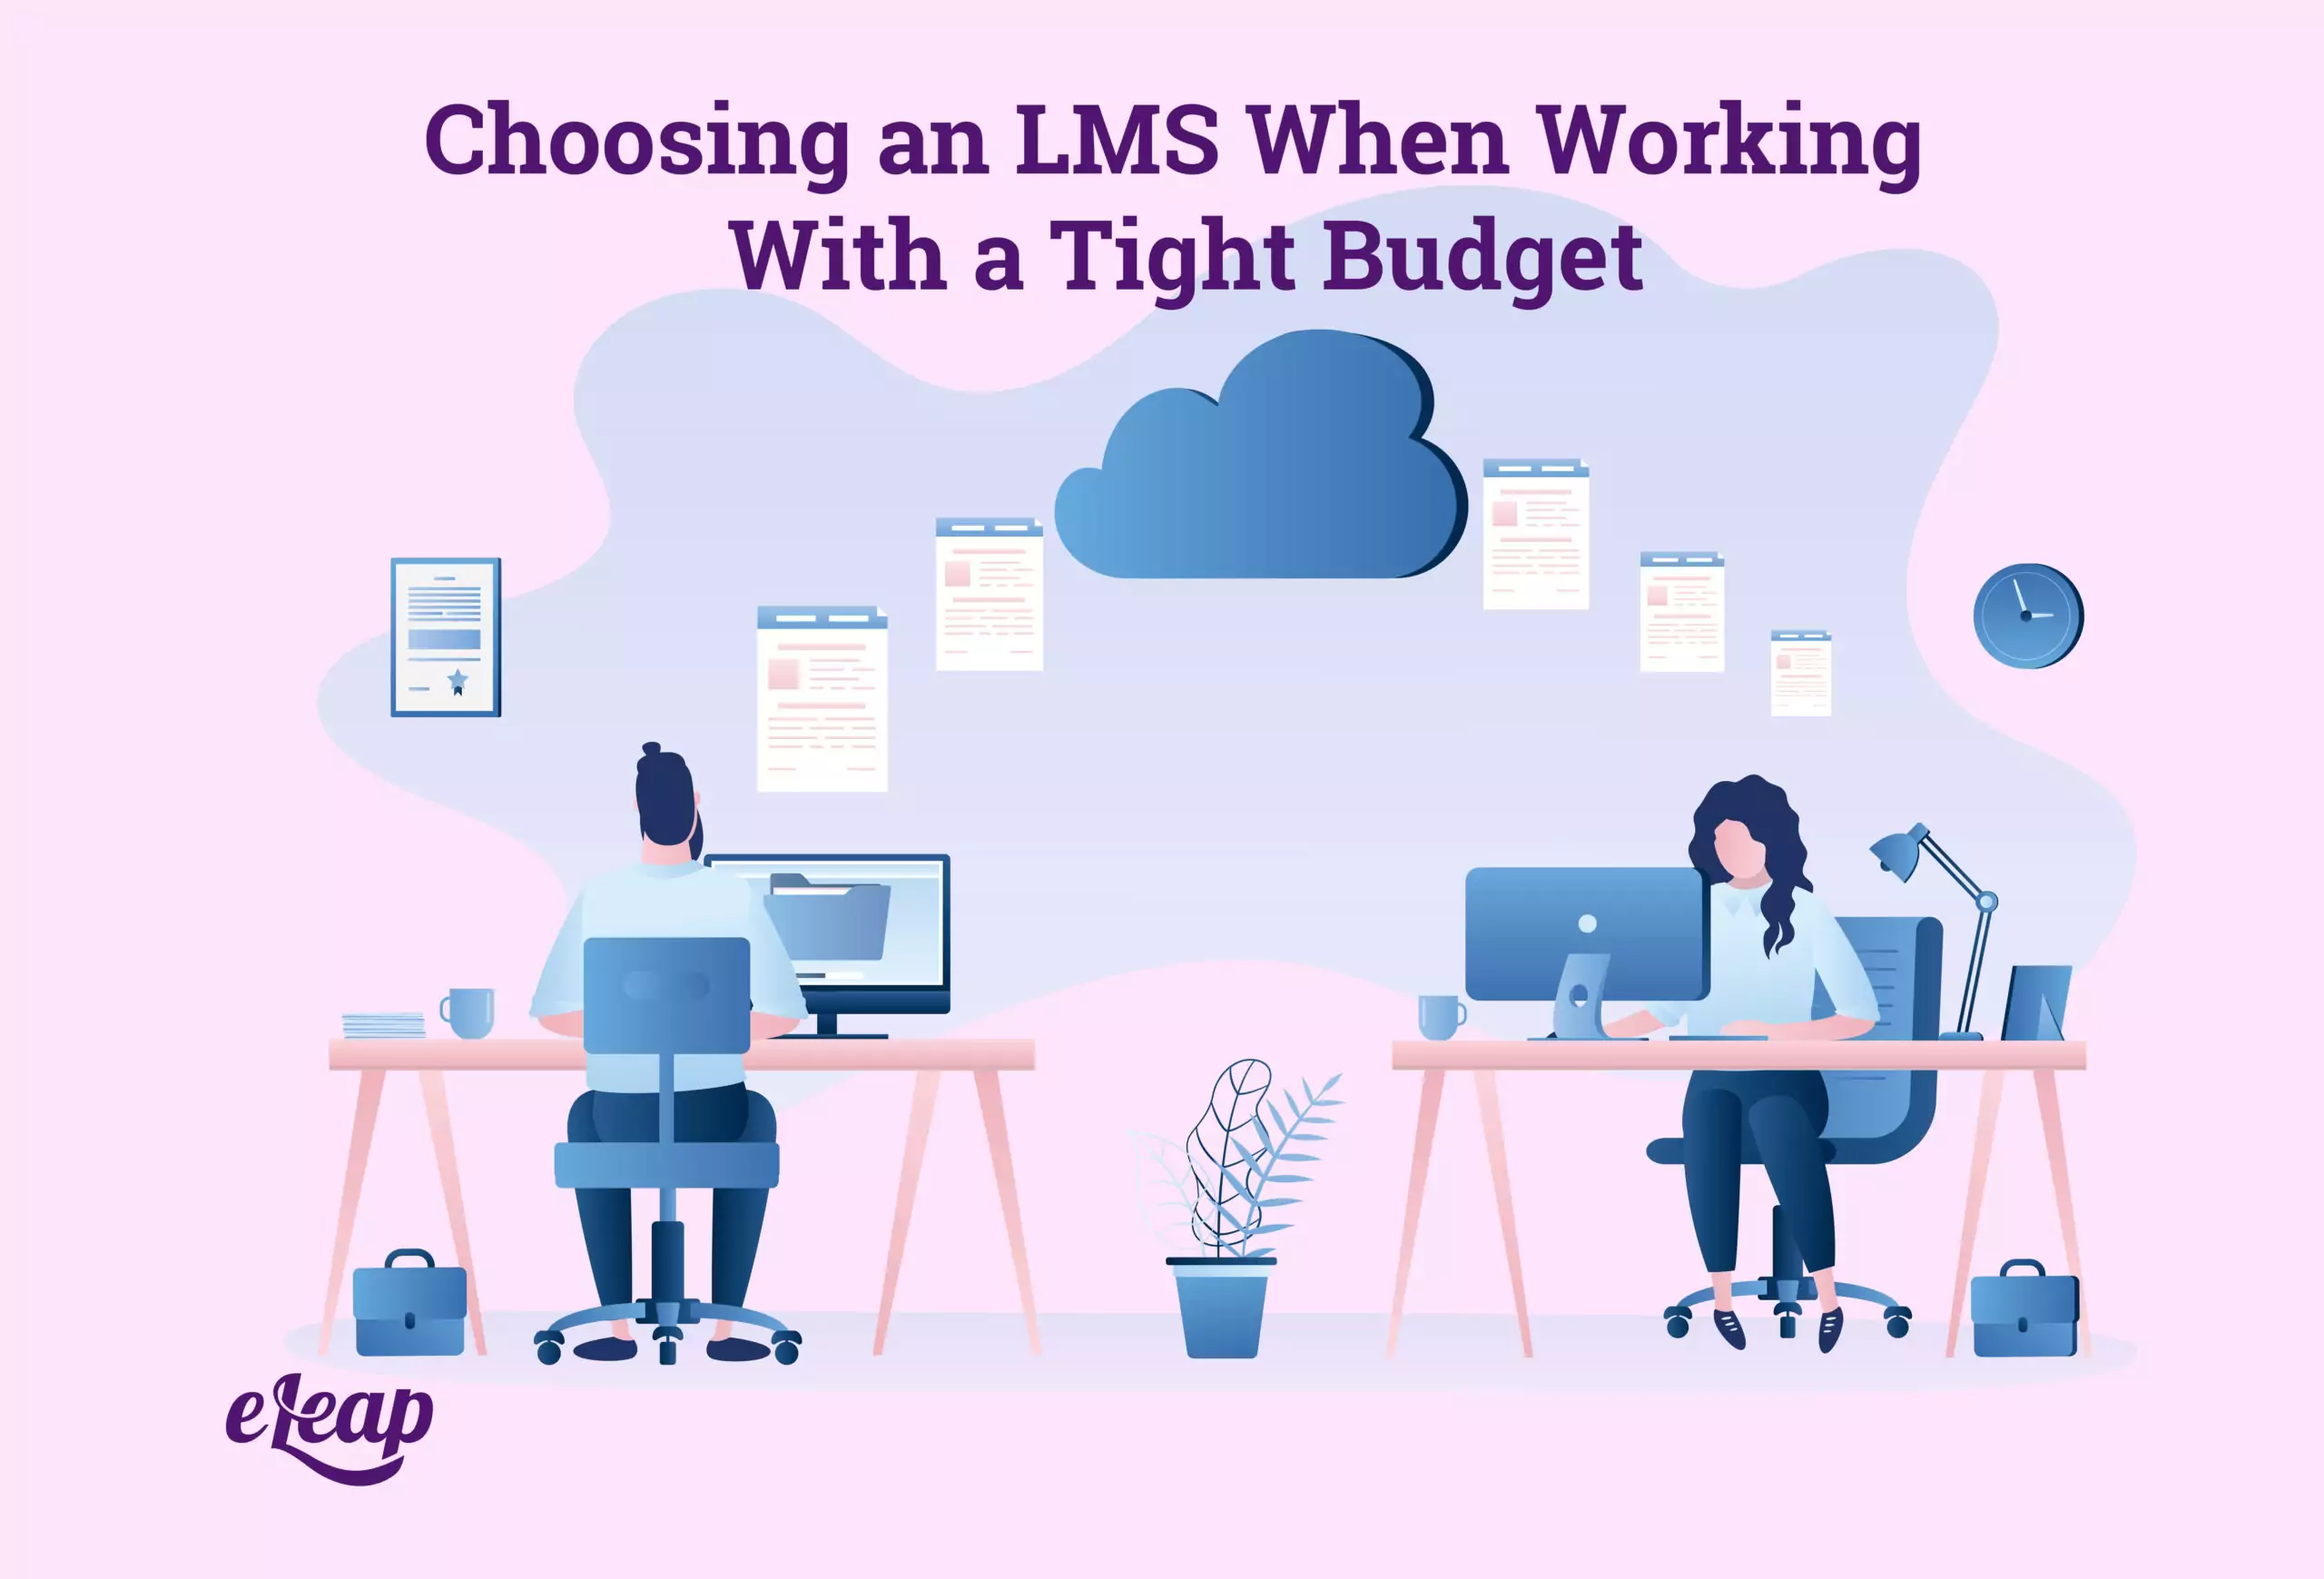 Choosing an LMS When Working With a Tight Budget